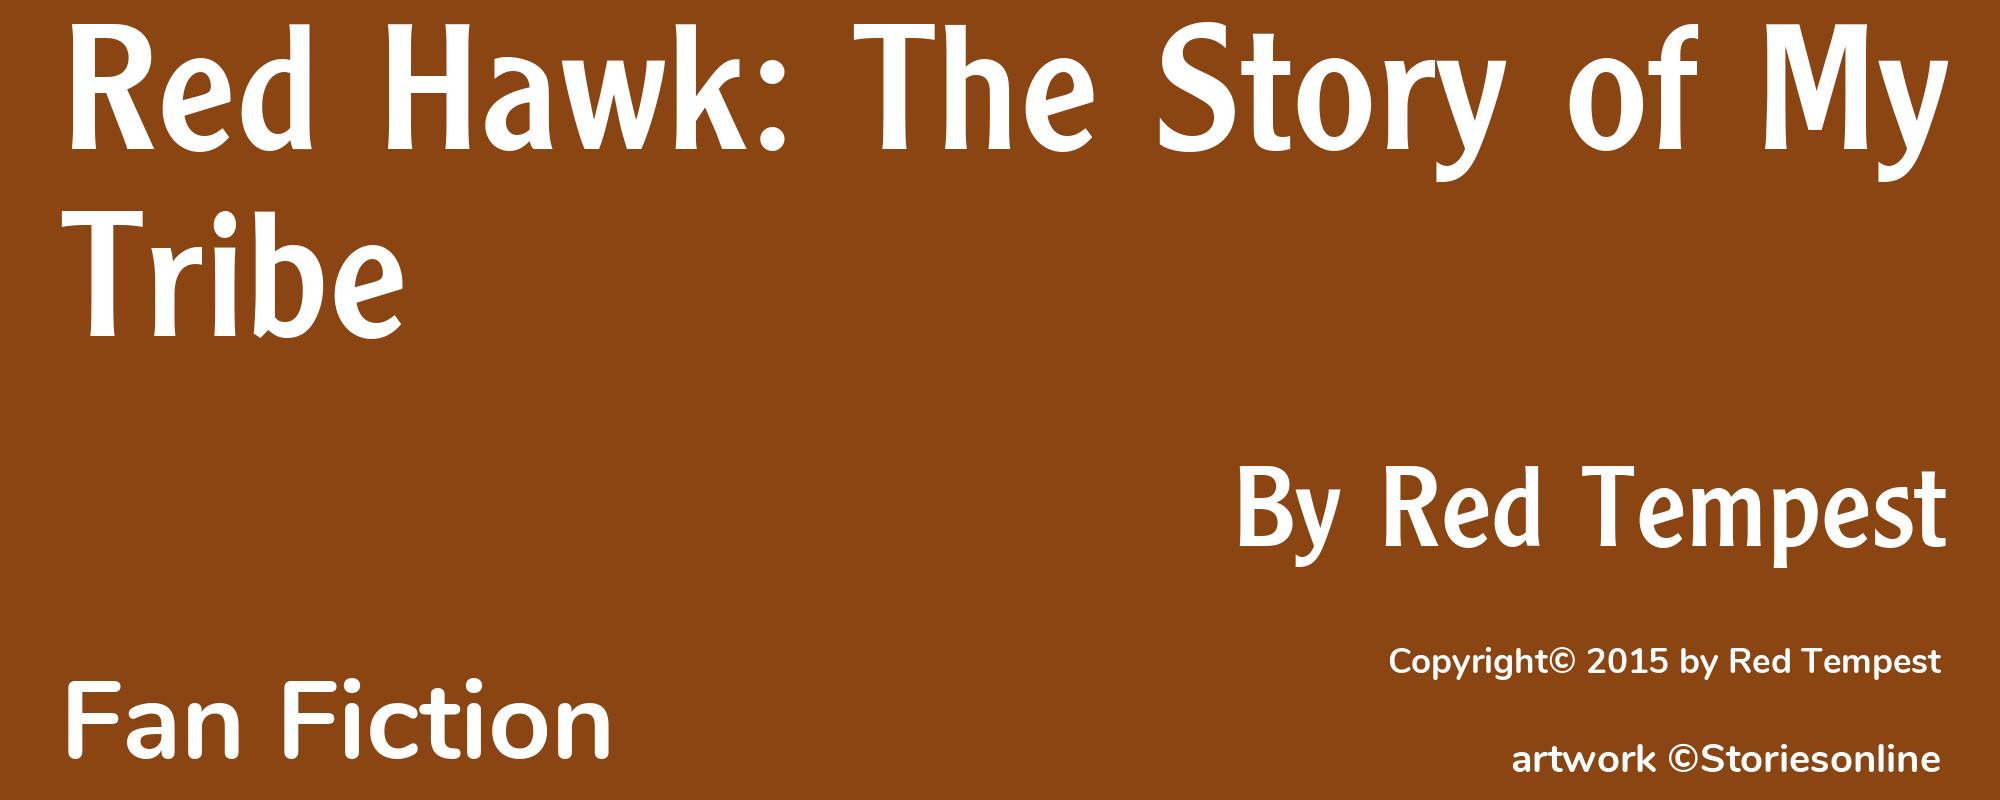 Red Hawk: The Story of My Tribe - Cover